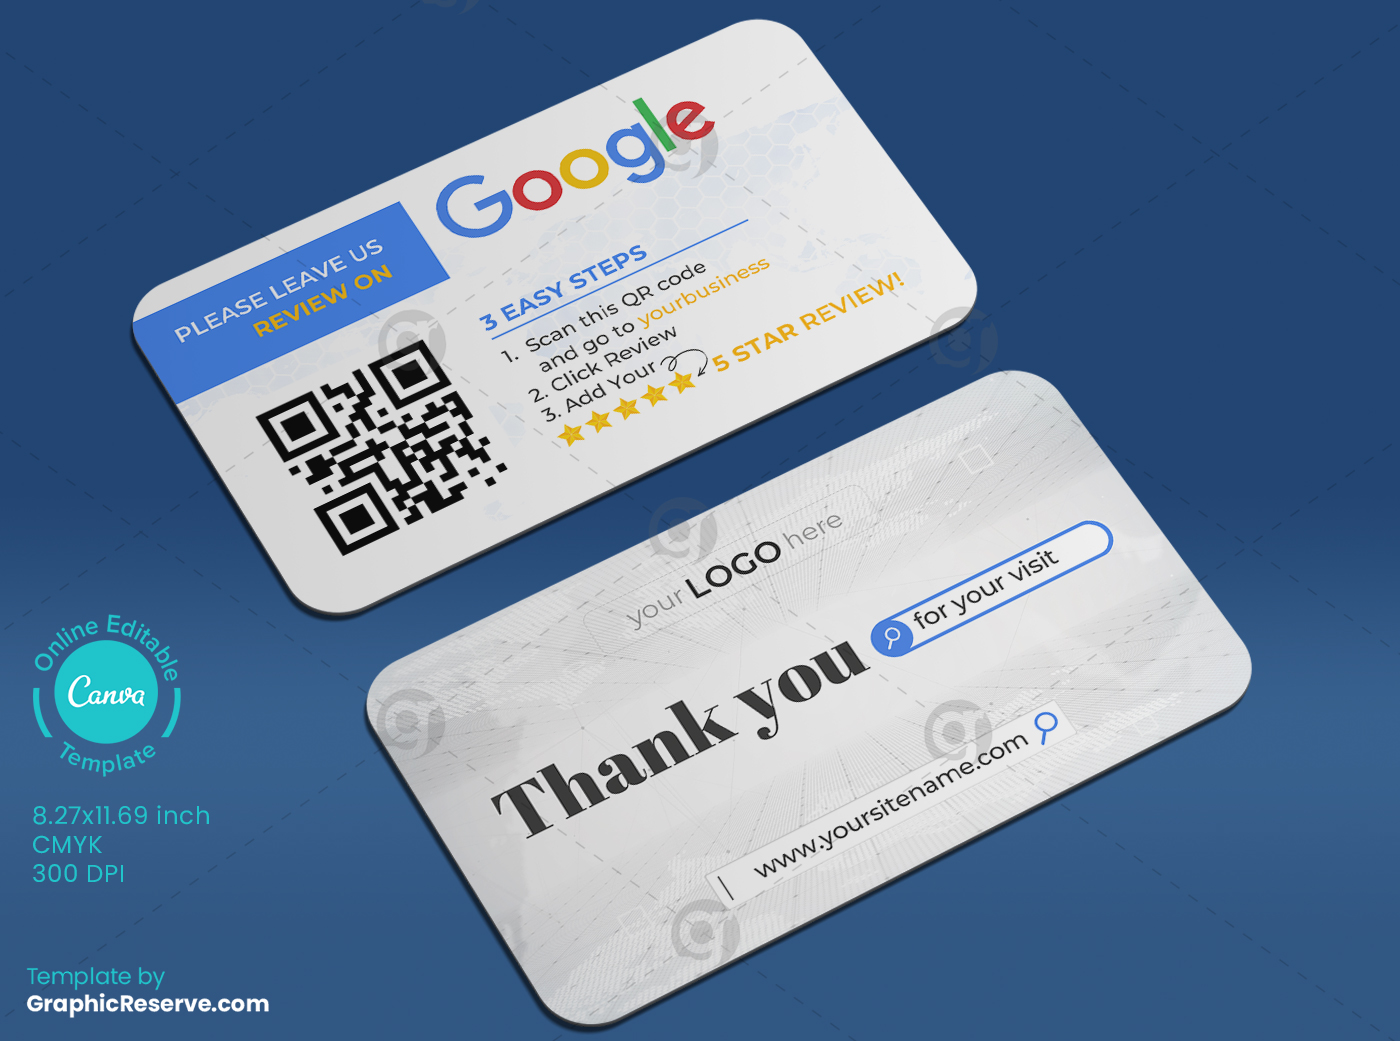 google 5-star rating business review card template